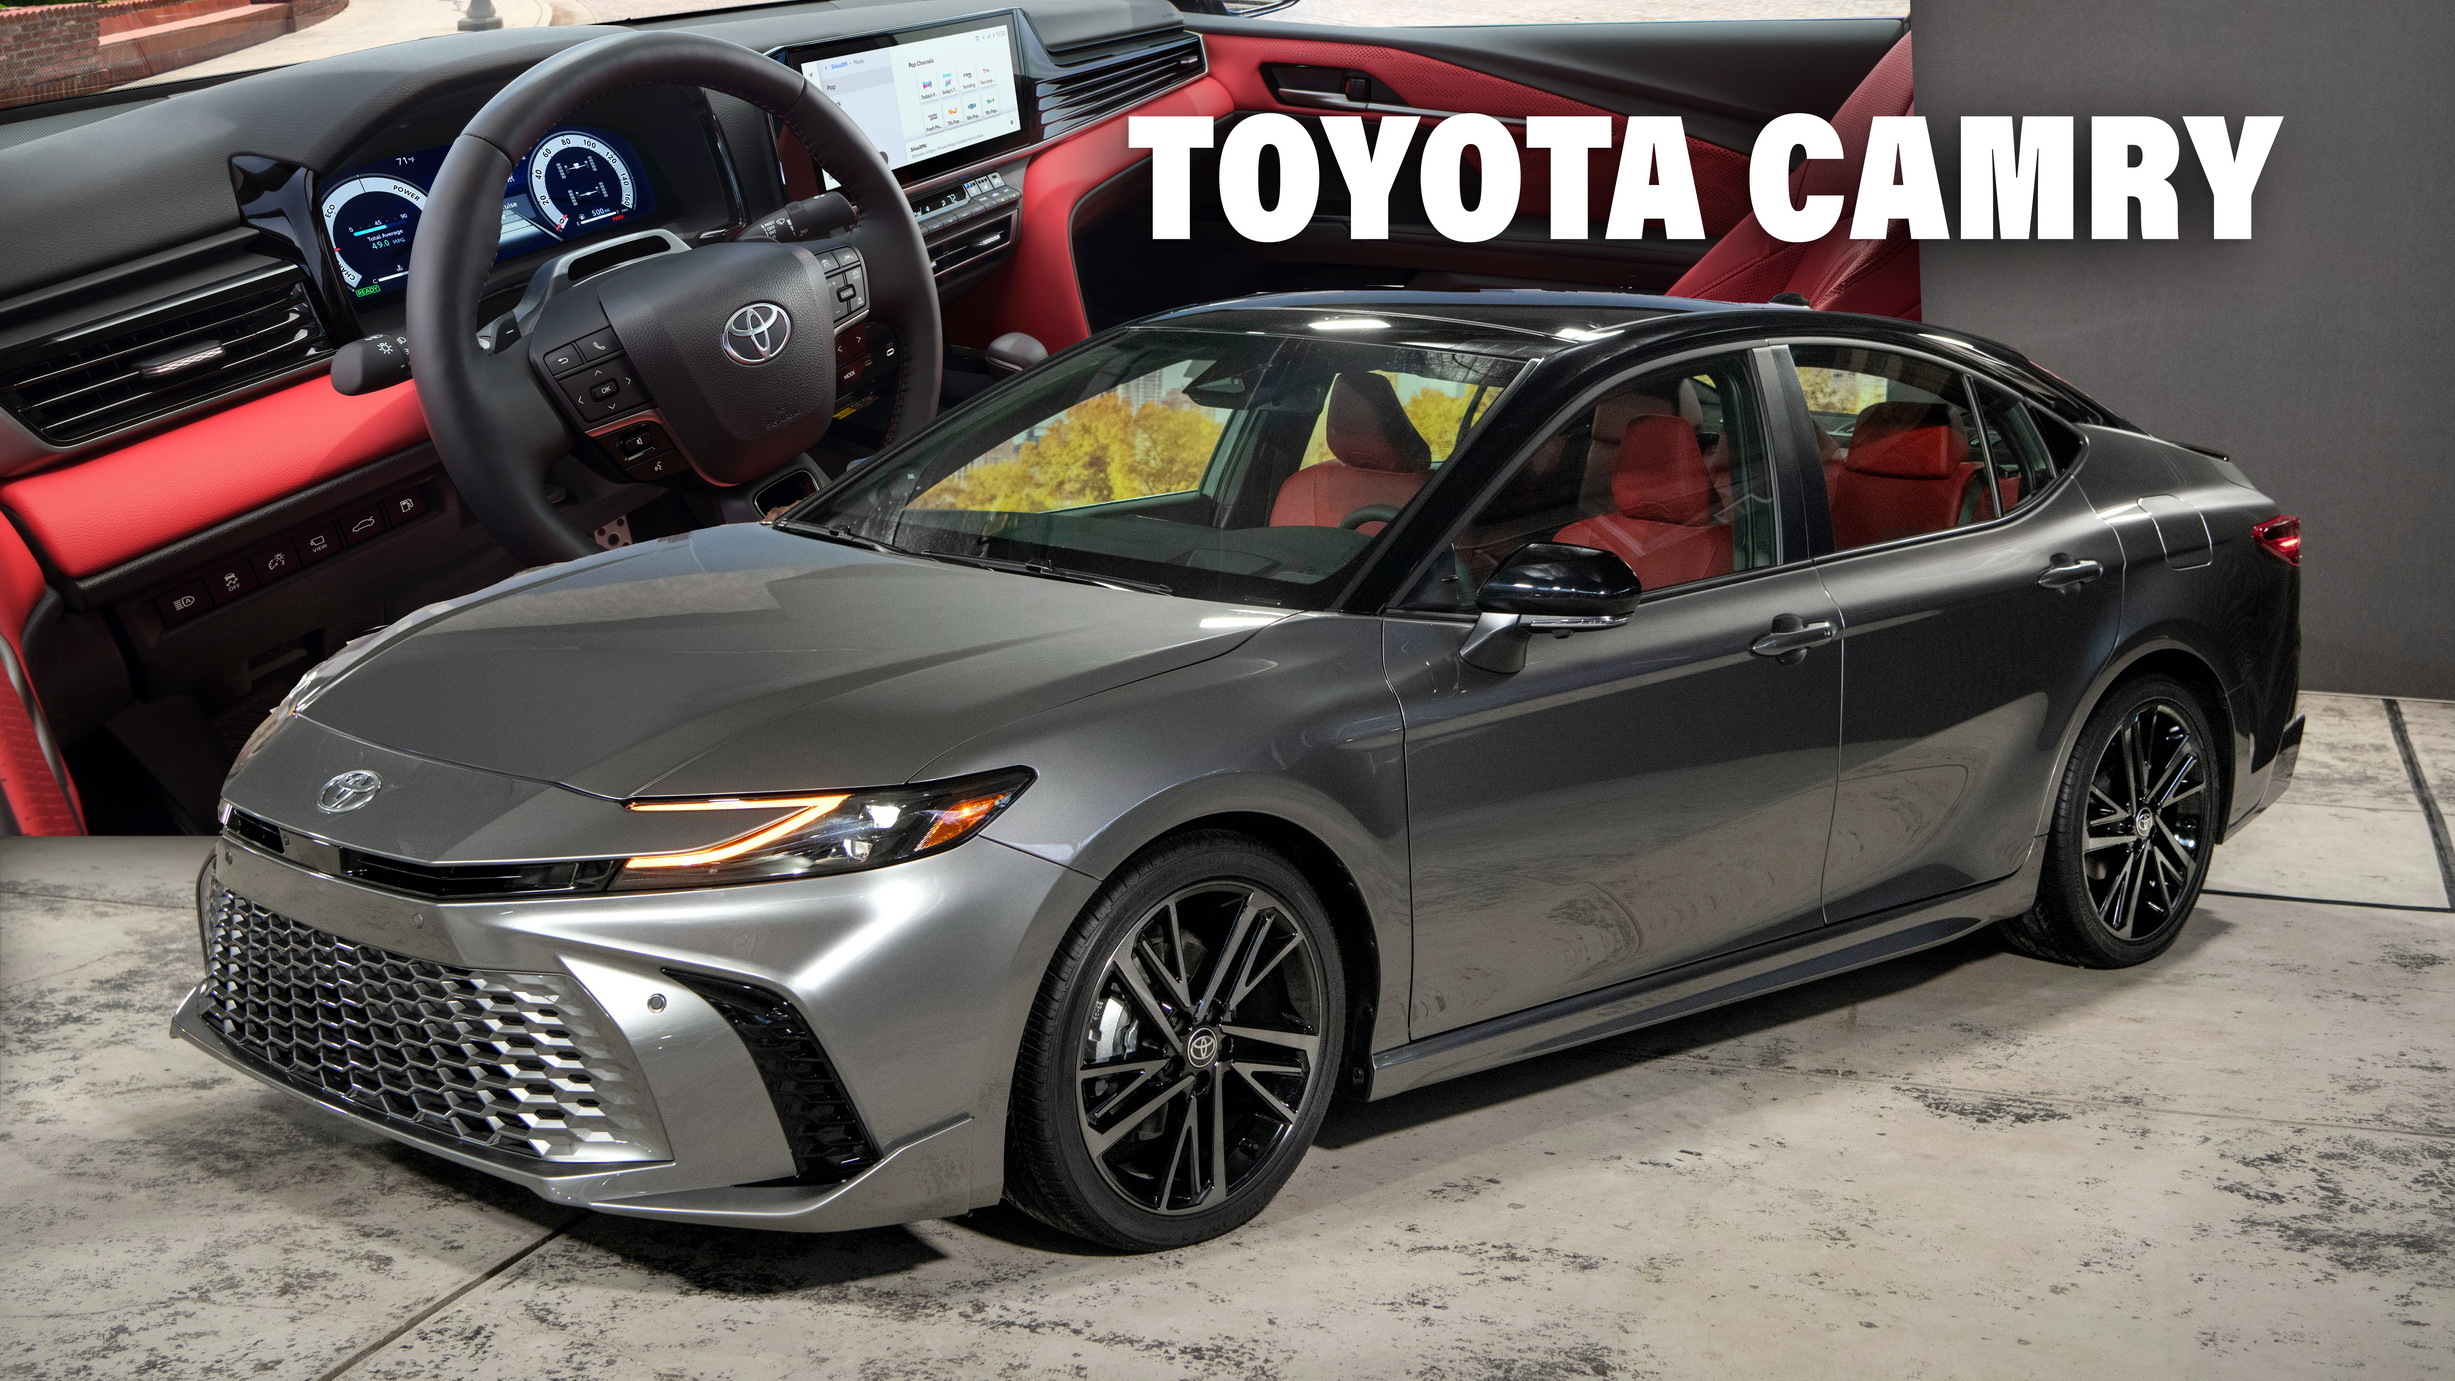 Toyota Camry Carscoops